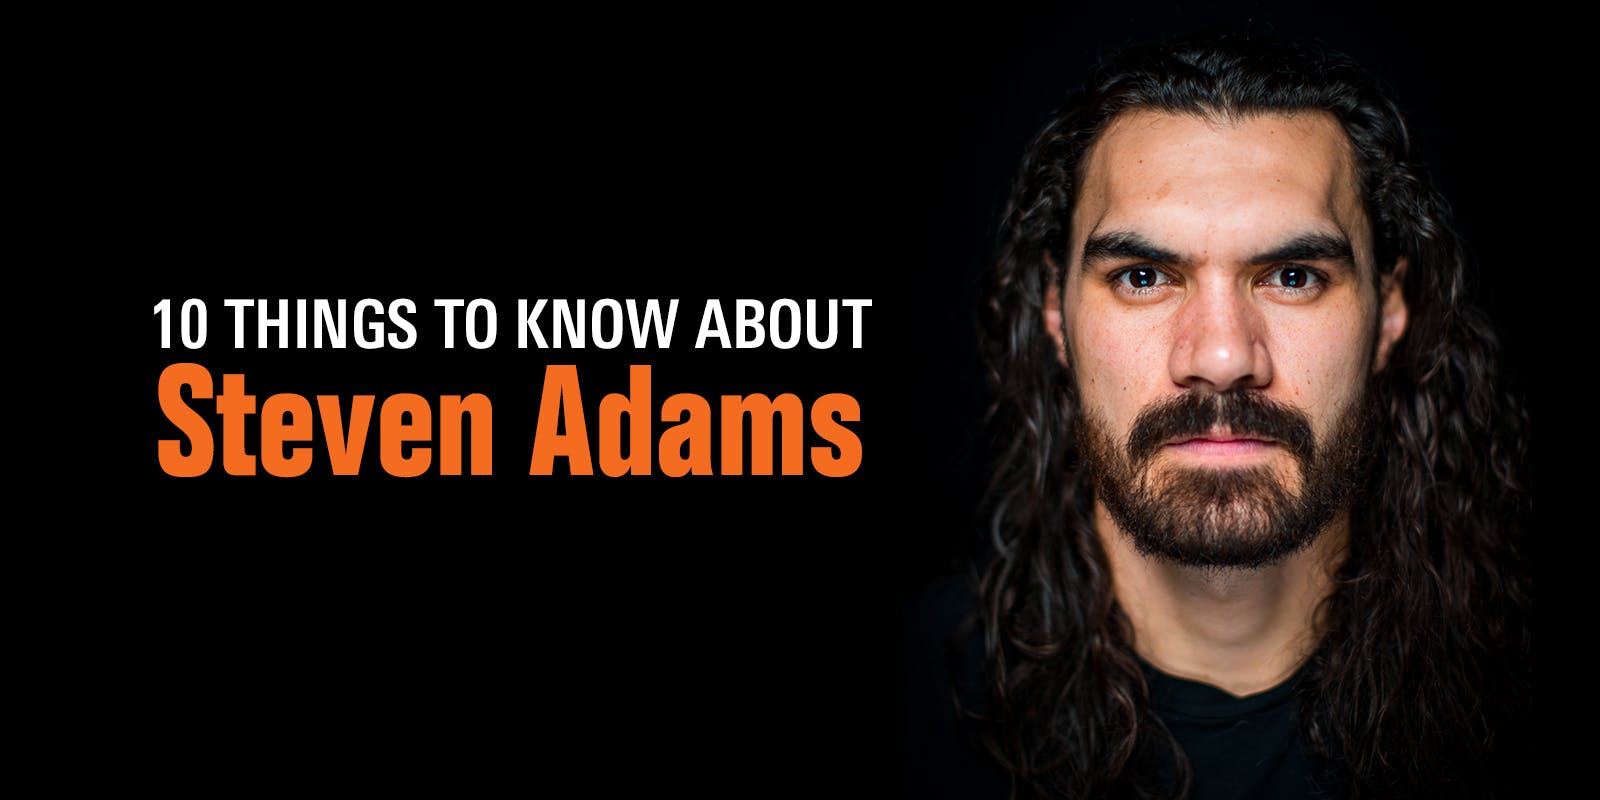 10 things to know about Steven Adams